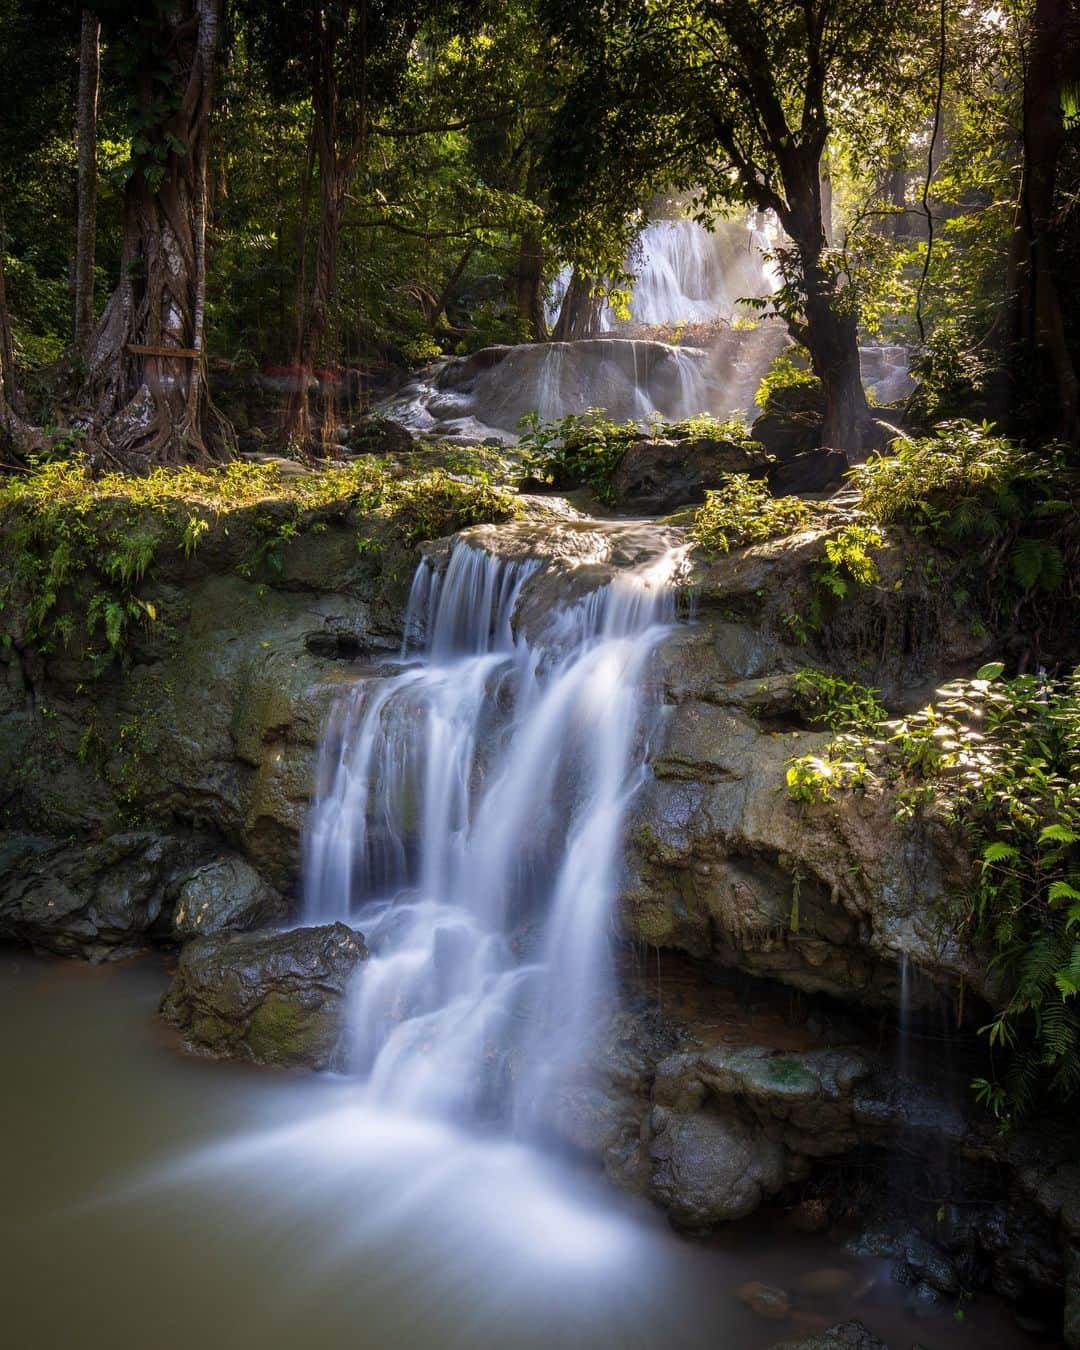 Canon Asiaのインスタグラム：「When they mention how "time reveals everything", this picture stands as the perfect illustration! Shooting with a long exposure gave @affandirh_photo an image that looks like it was painted on – from the softly flowing waters to the sunlight peeking through the forest canopy. Thanks to the wide angle EF16-35mm f/4L IS USM, we're able to enjoy as much of this picturesque scene as possible.⁣ -⁣ 📷 Photo by @affandirh_photo on Canon EOS R | EF16-35mm f/4L IS USM | 26mm | f/11 | ISO 100 | 25s⁣ -⁣ #TeamCanon #CanonAsia #CanonPhotography #CanonPhoto #CanonImages #CanonEOSR #Mirrorless #CanonLens #CanonColourScience #PhotoOfTheDay #IAmCanon #ThePhotoHour #LandscapePhotography #NaturePhotography」